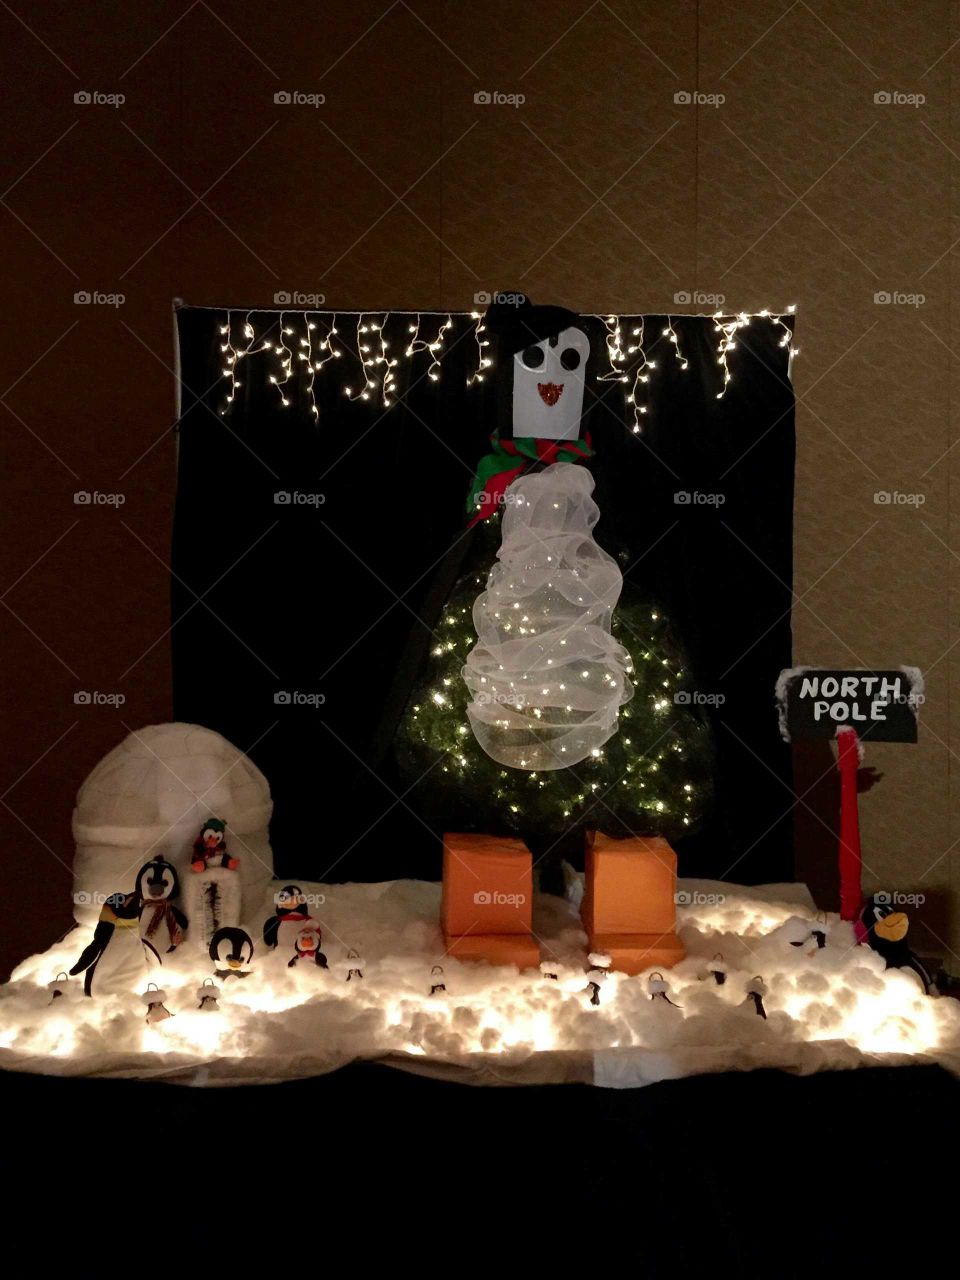 Penguin Christmas Tree with Igloo, Penguins, and Snow